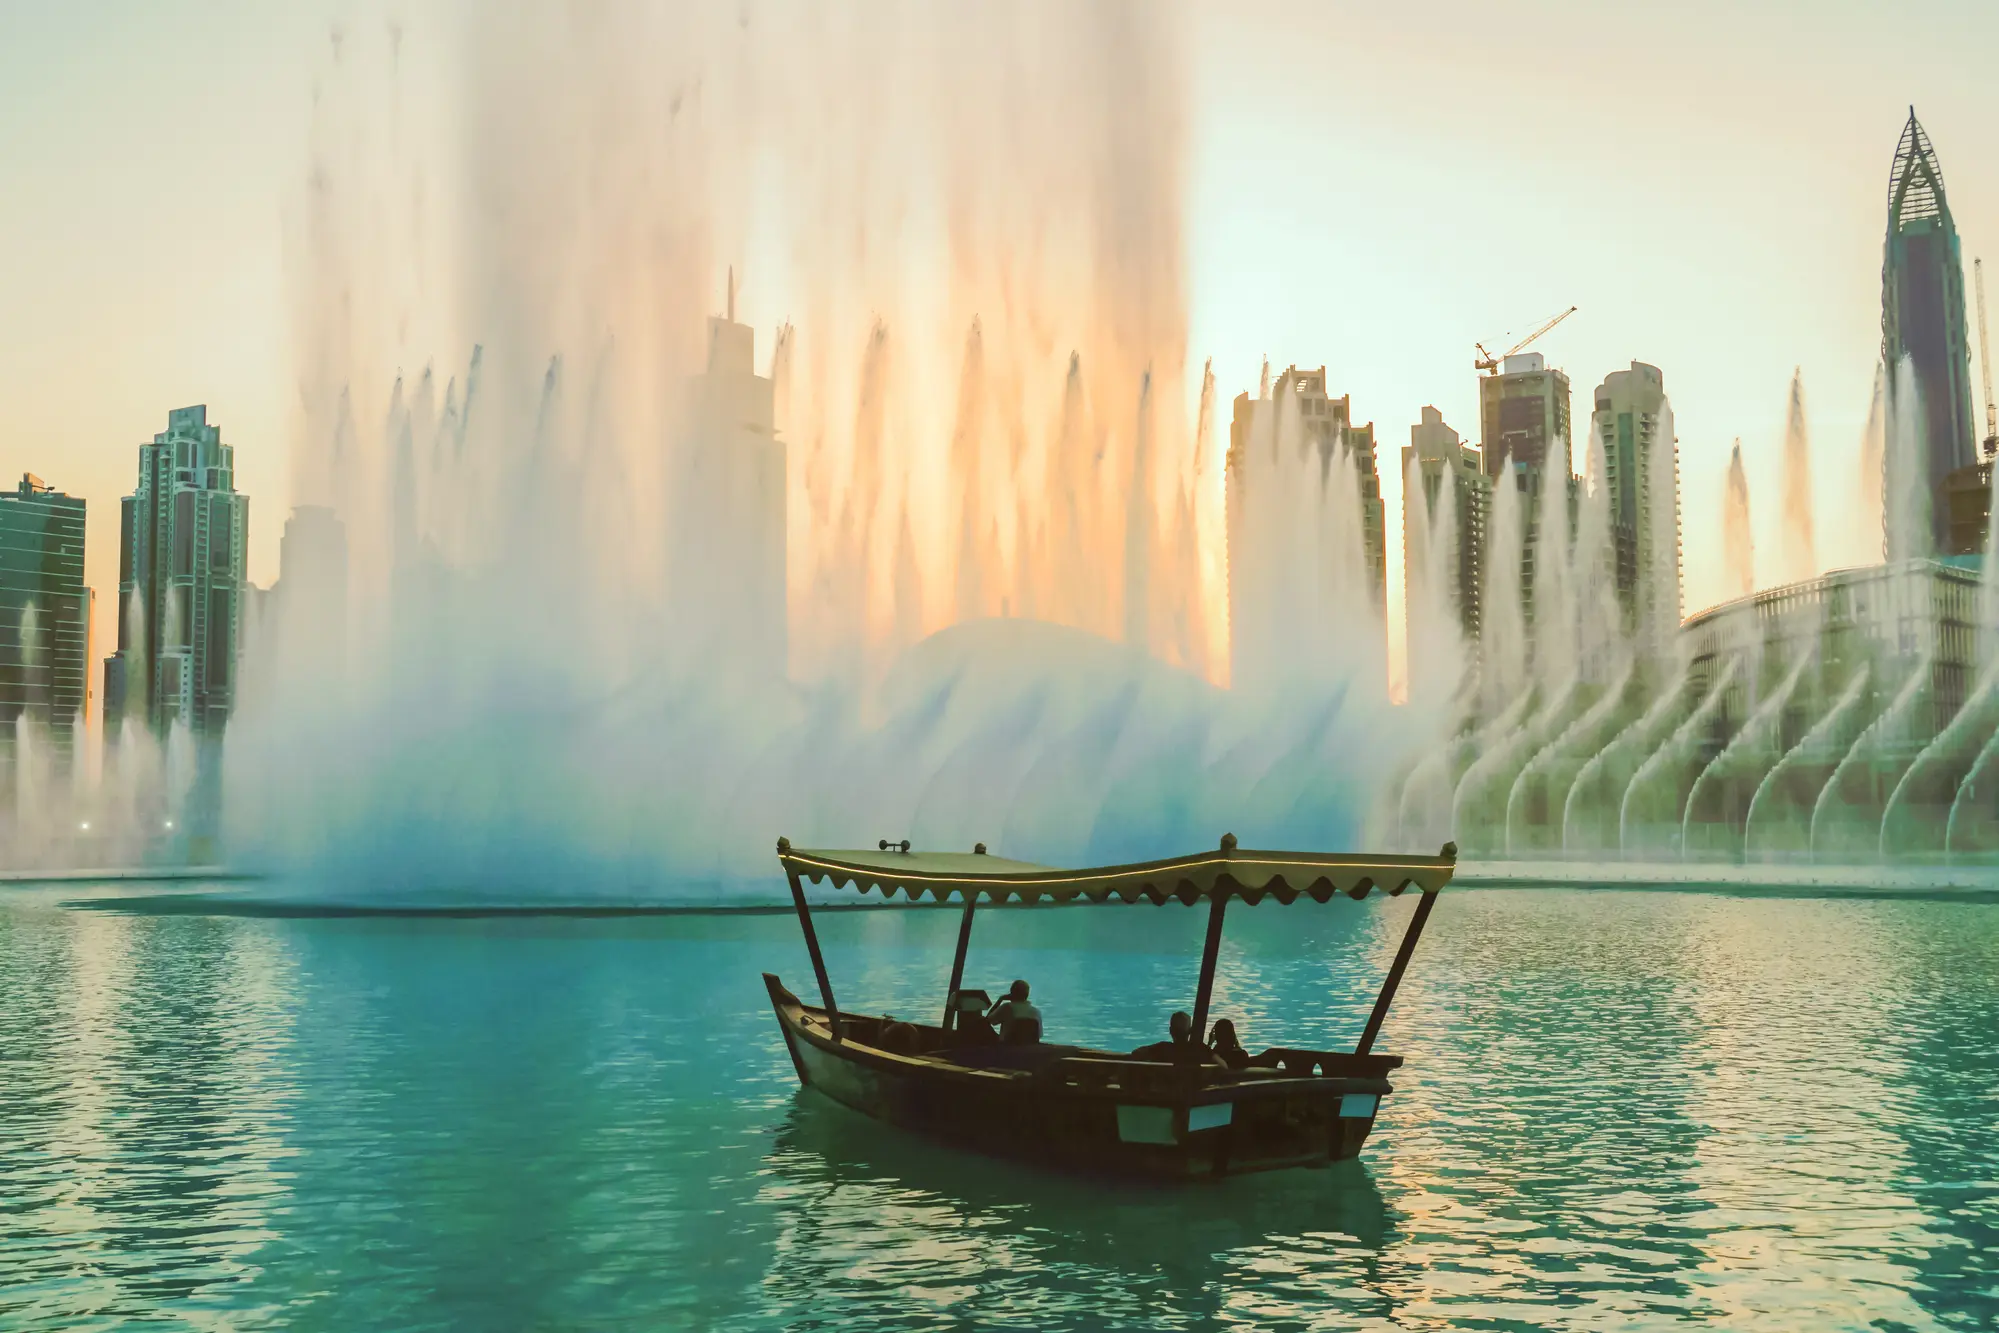 Old traditional wooden boat "Abra" on the lake surrounding the fountain show at Dubai Mall during sunset. A top thing to do during your two days in Dubai.